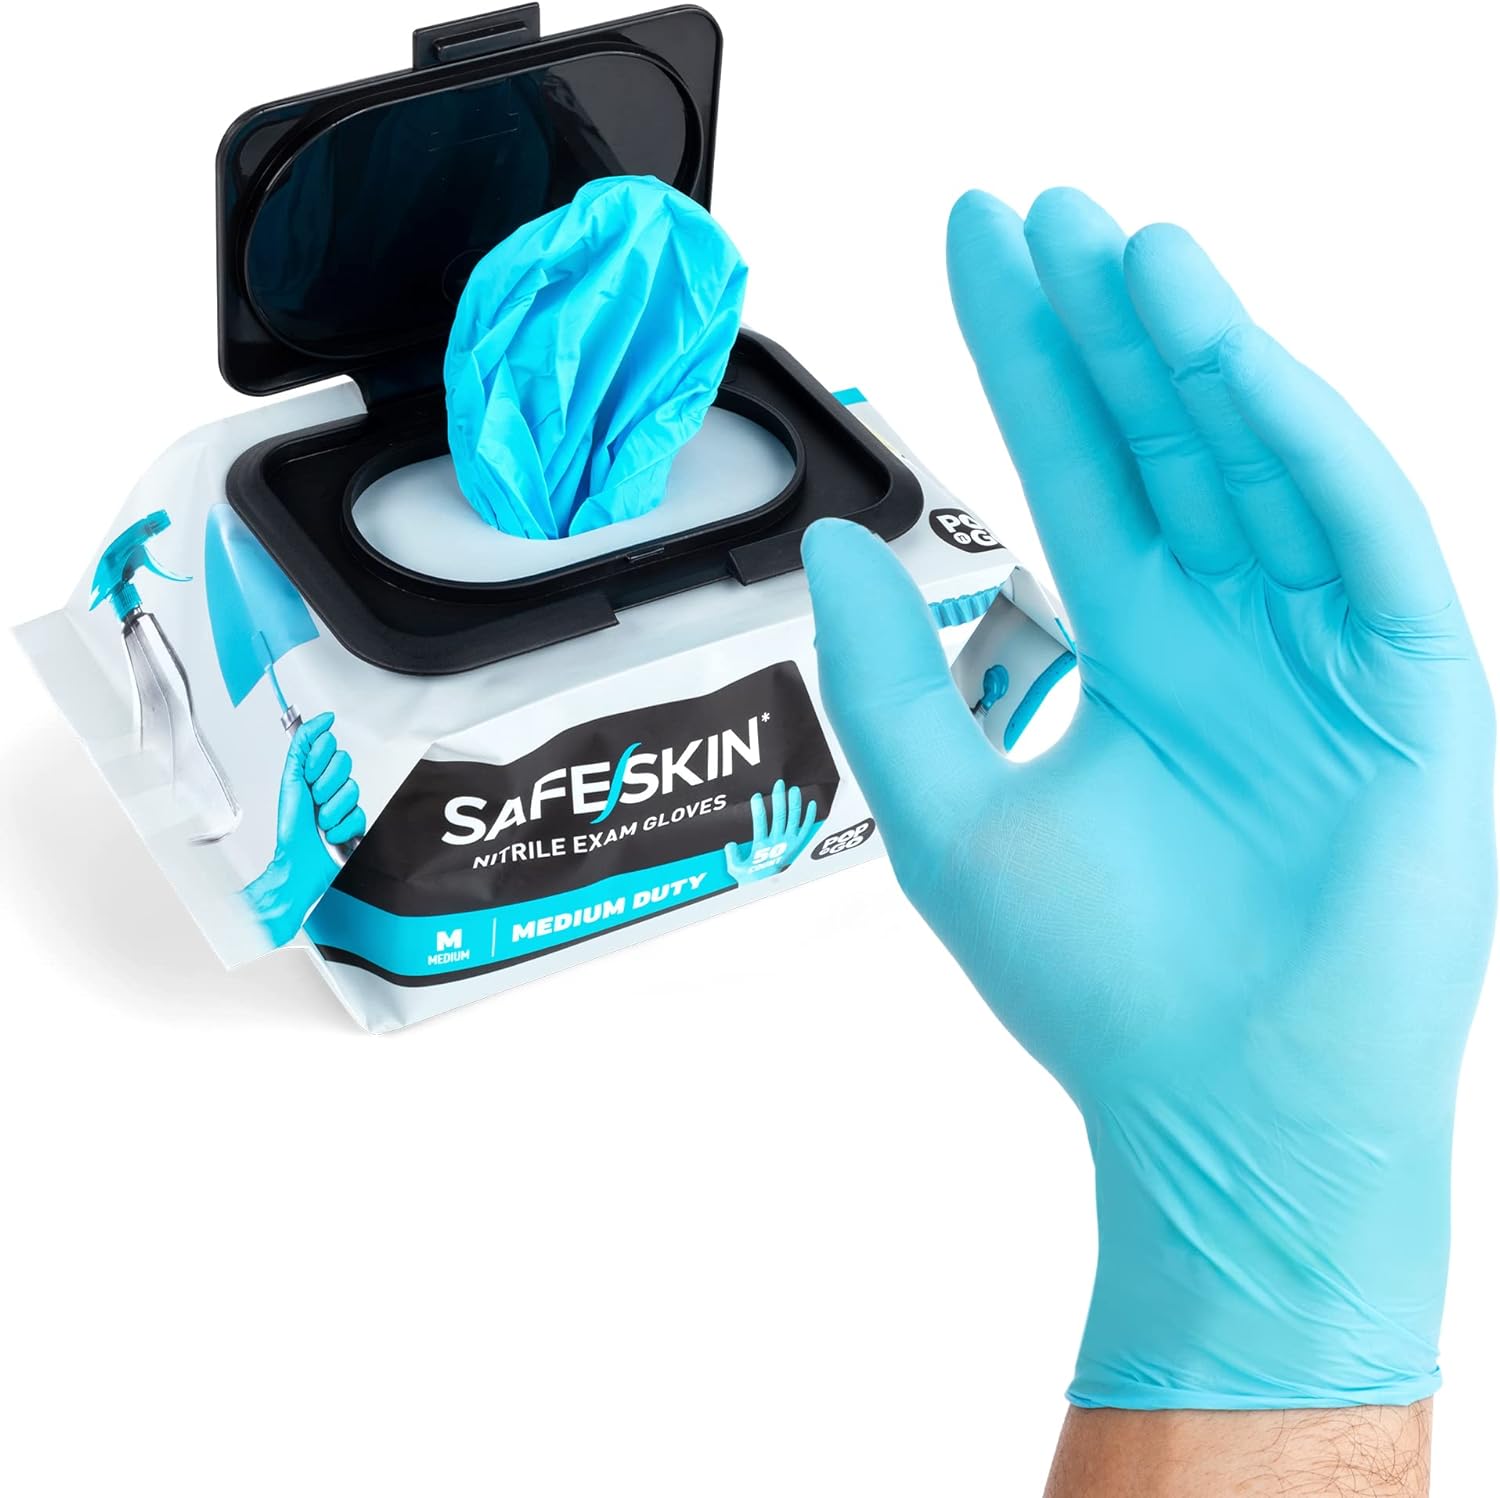 SAFESKIN Disposable Nitrile Gloves in POP-N-GO Pack 50 or 200 Count Medium Duty, Powder-Free -Cleaning, Gardening, Crafts